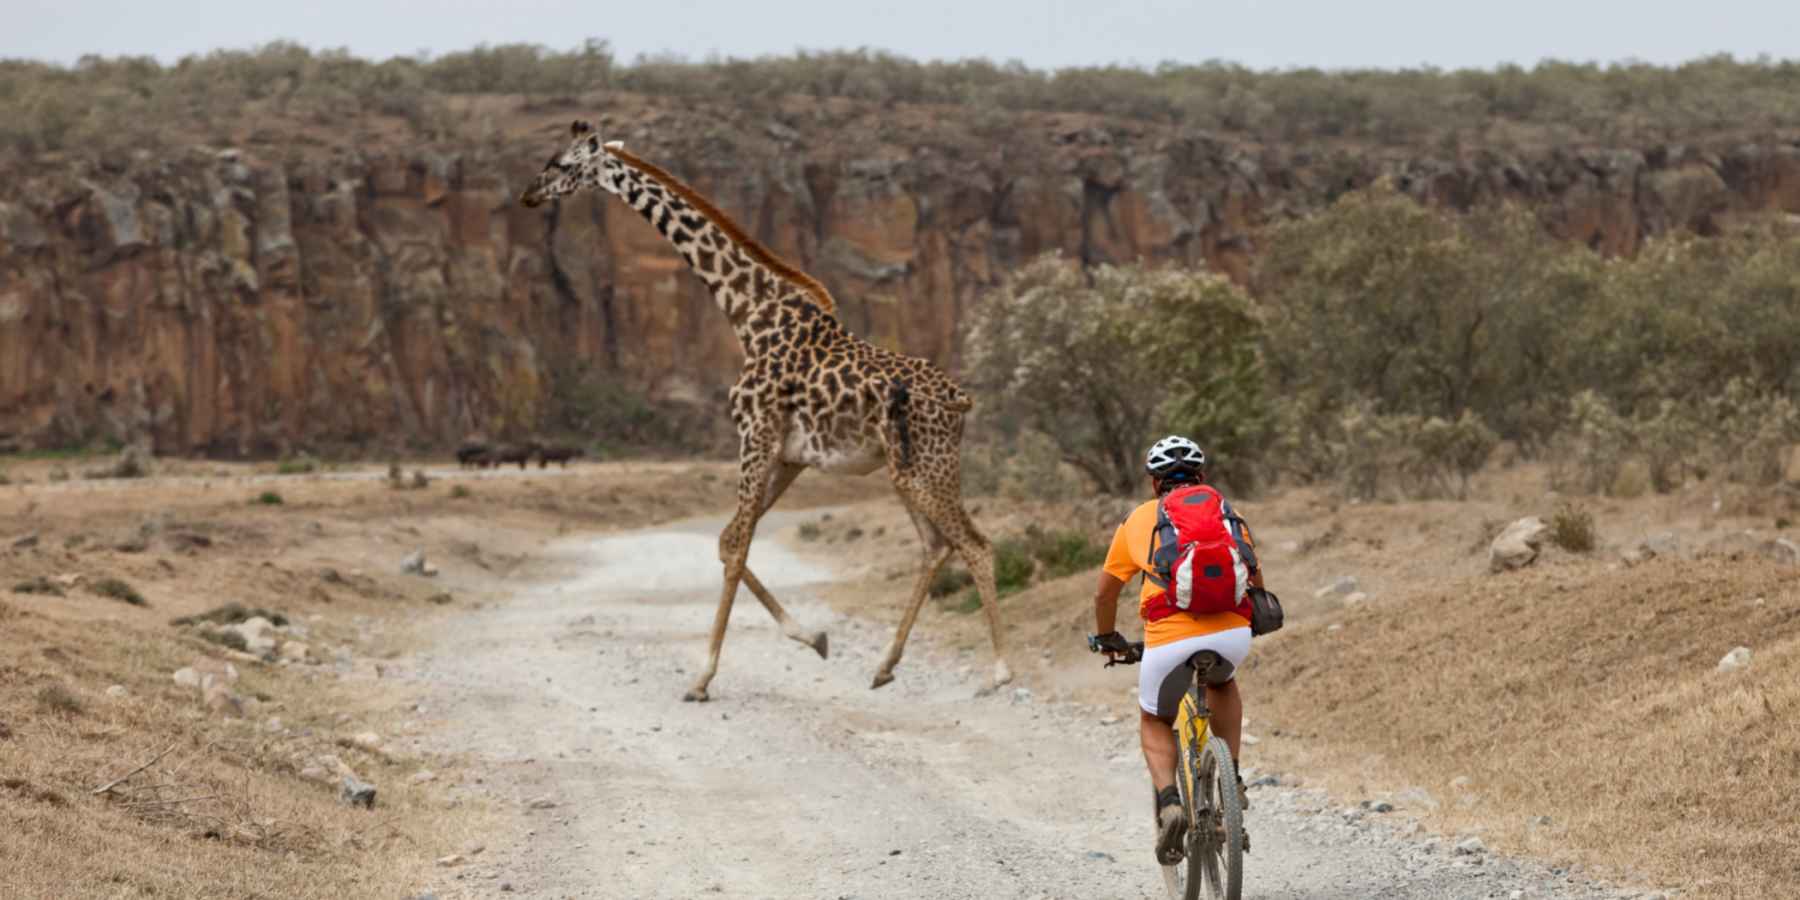 A giraffe crosses the road in front of a cyclist in Tanzania, Africa